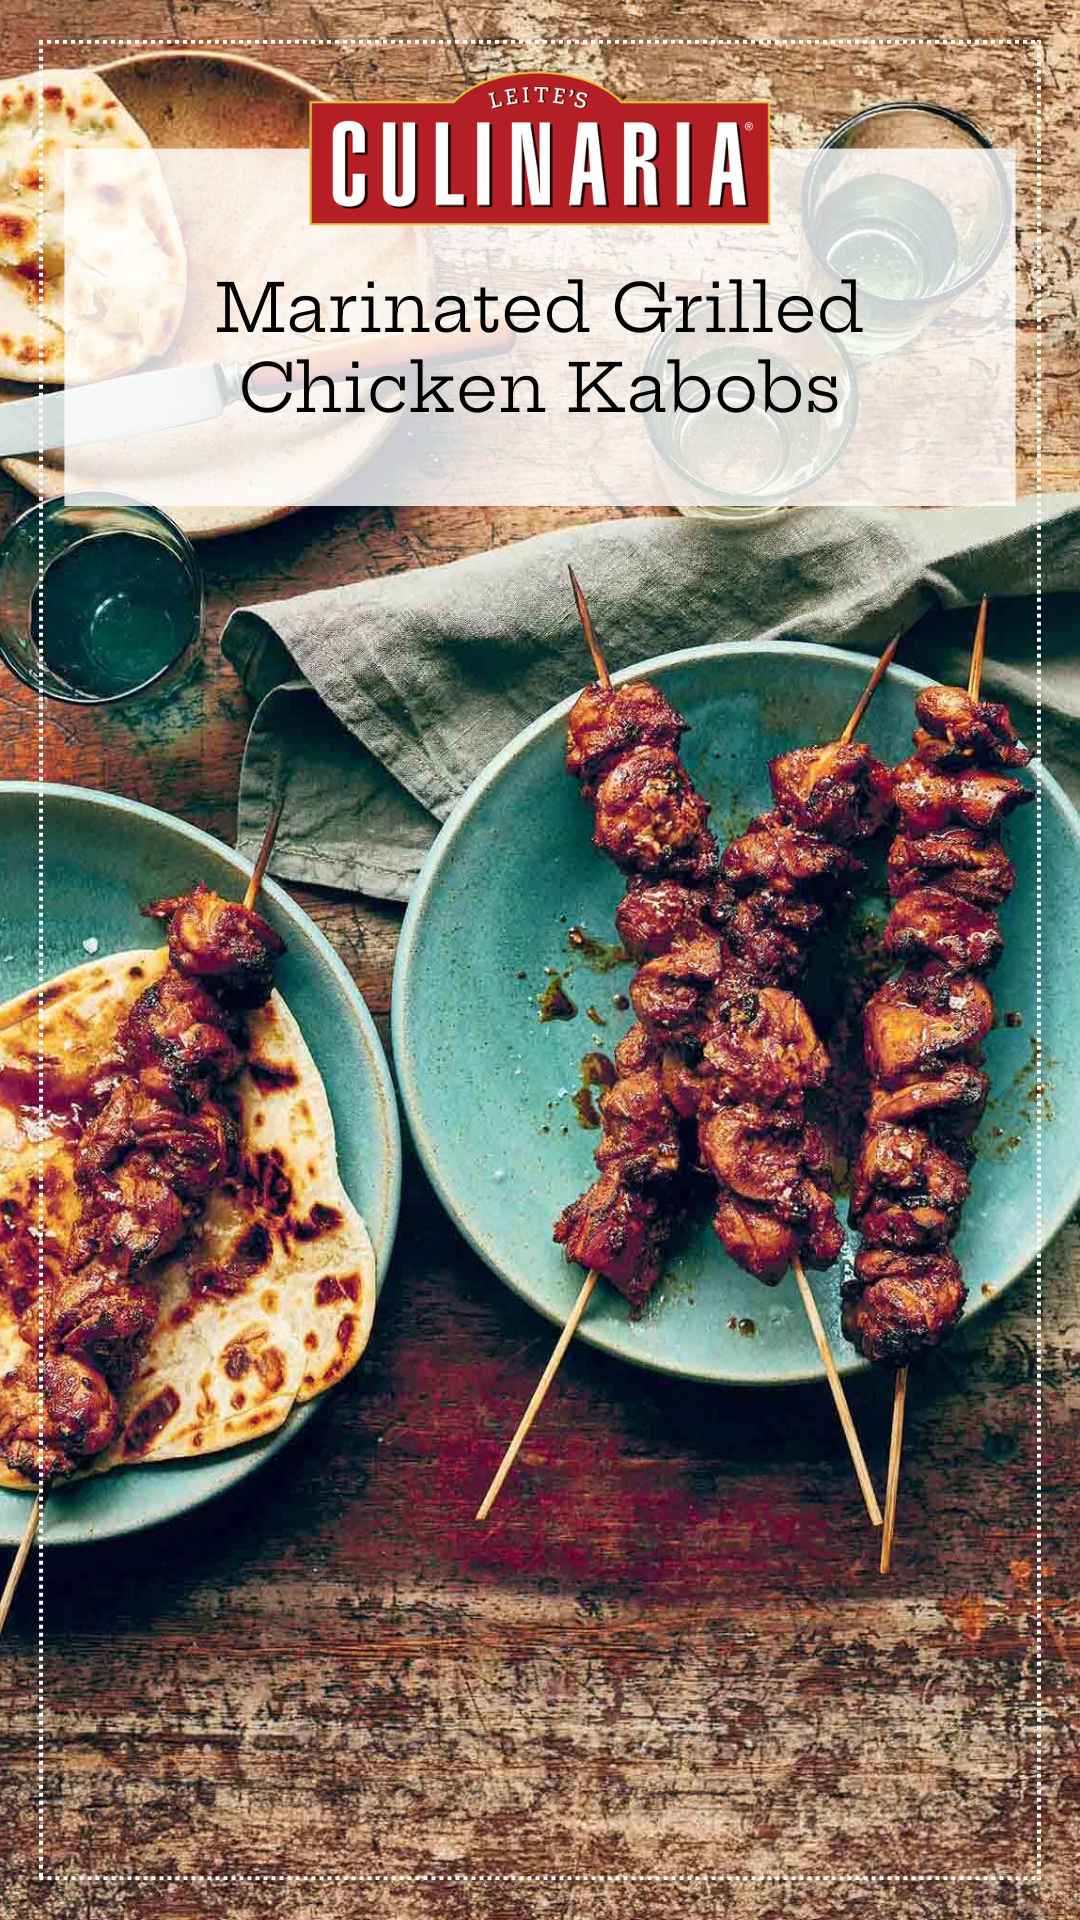 Three marinated chicken skewers on a blue plate with another skewer on top of a flatbread on a second plate.